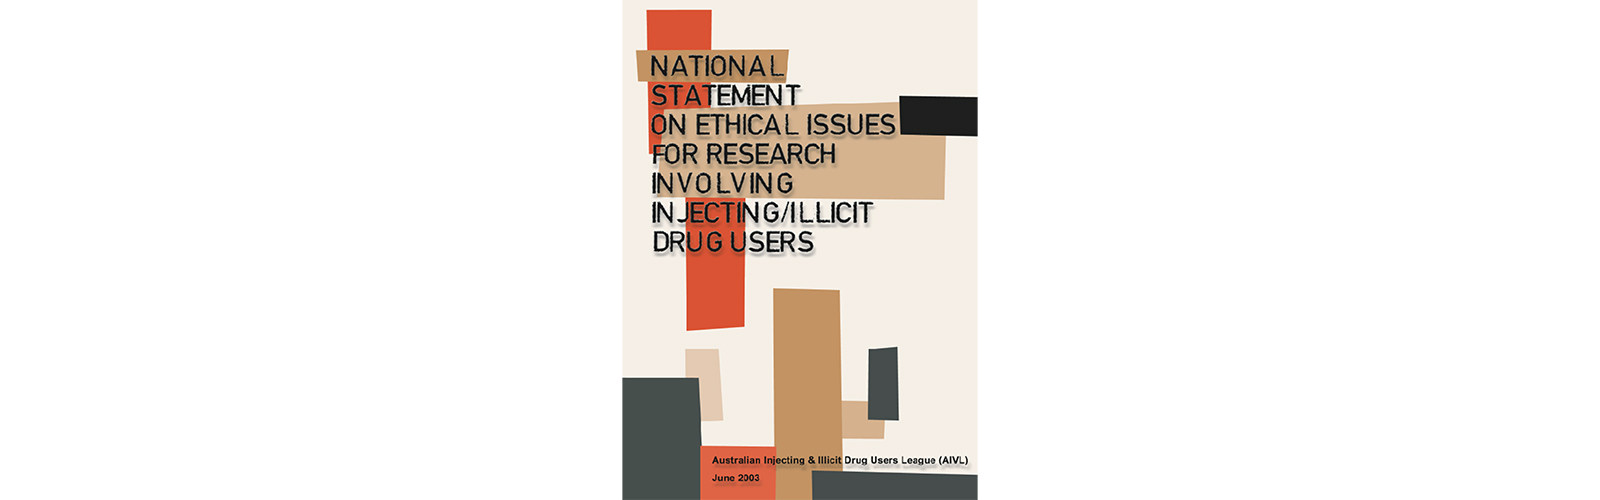 Featured image for “National statement on ethical issues for research involving injecting/illicit drug users”